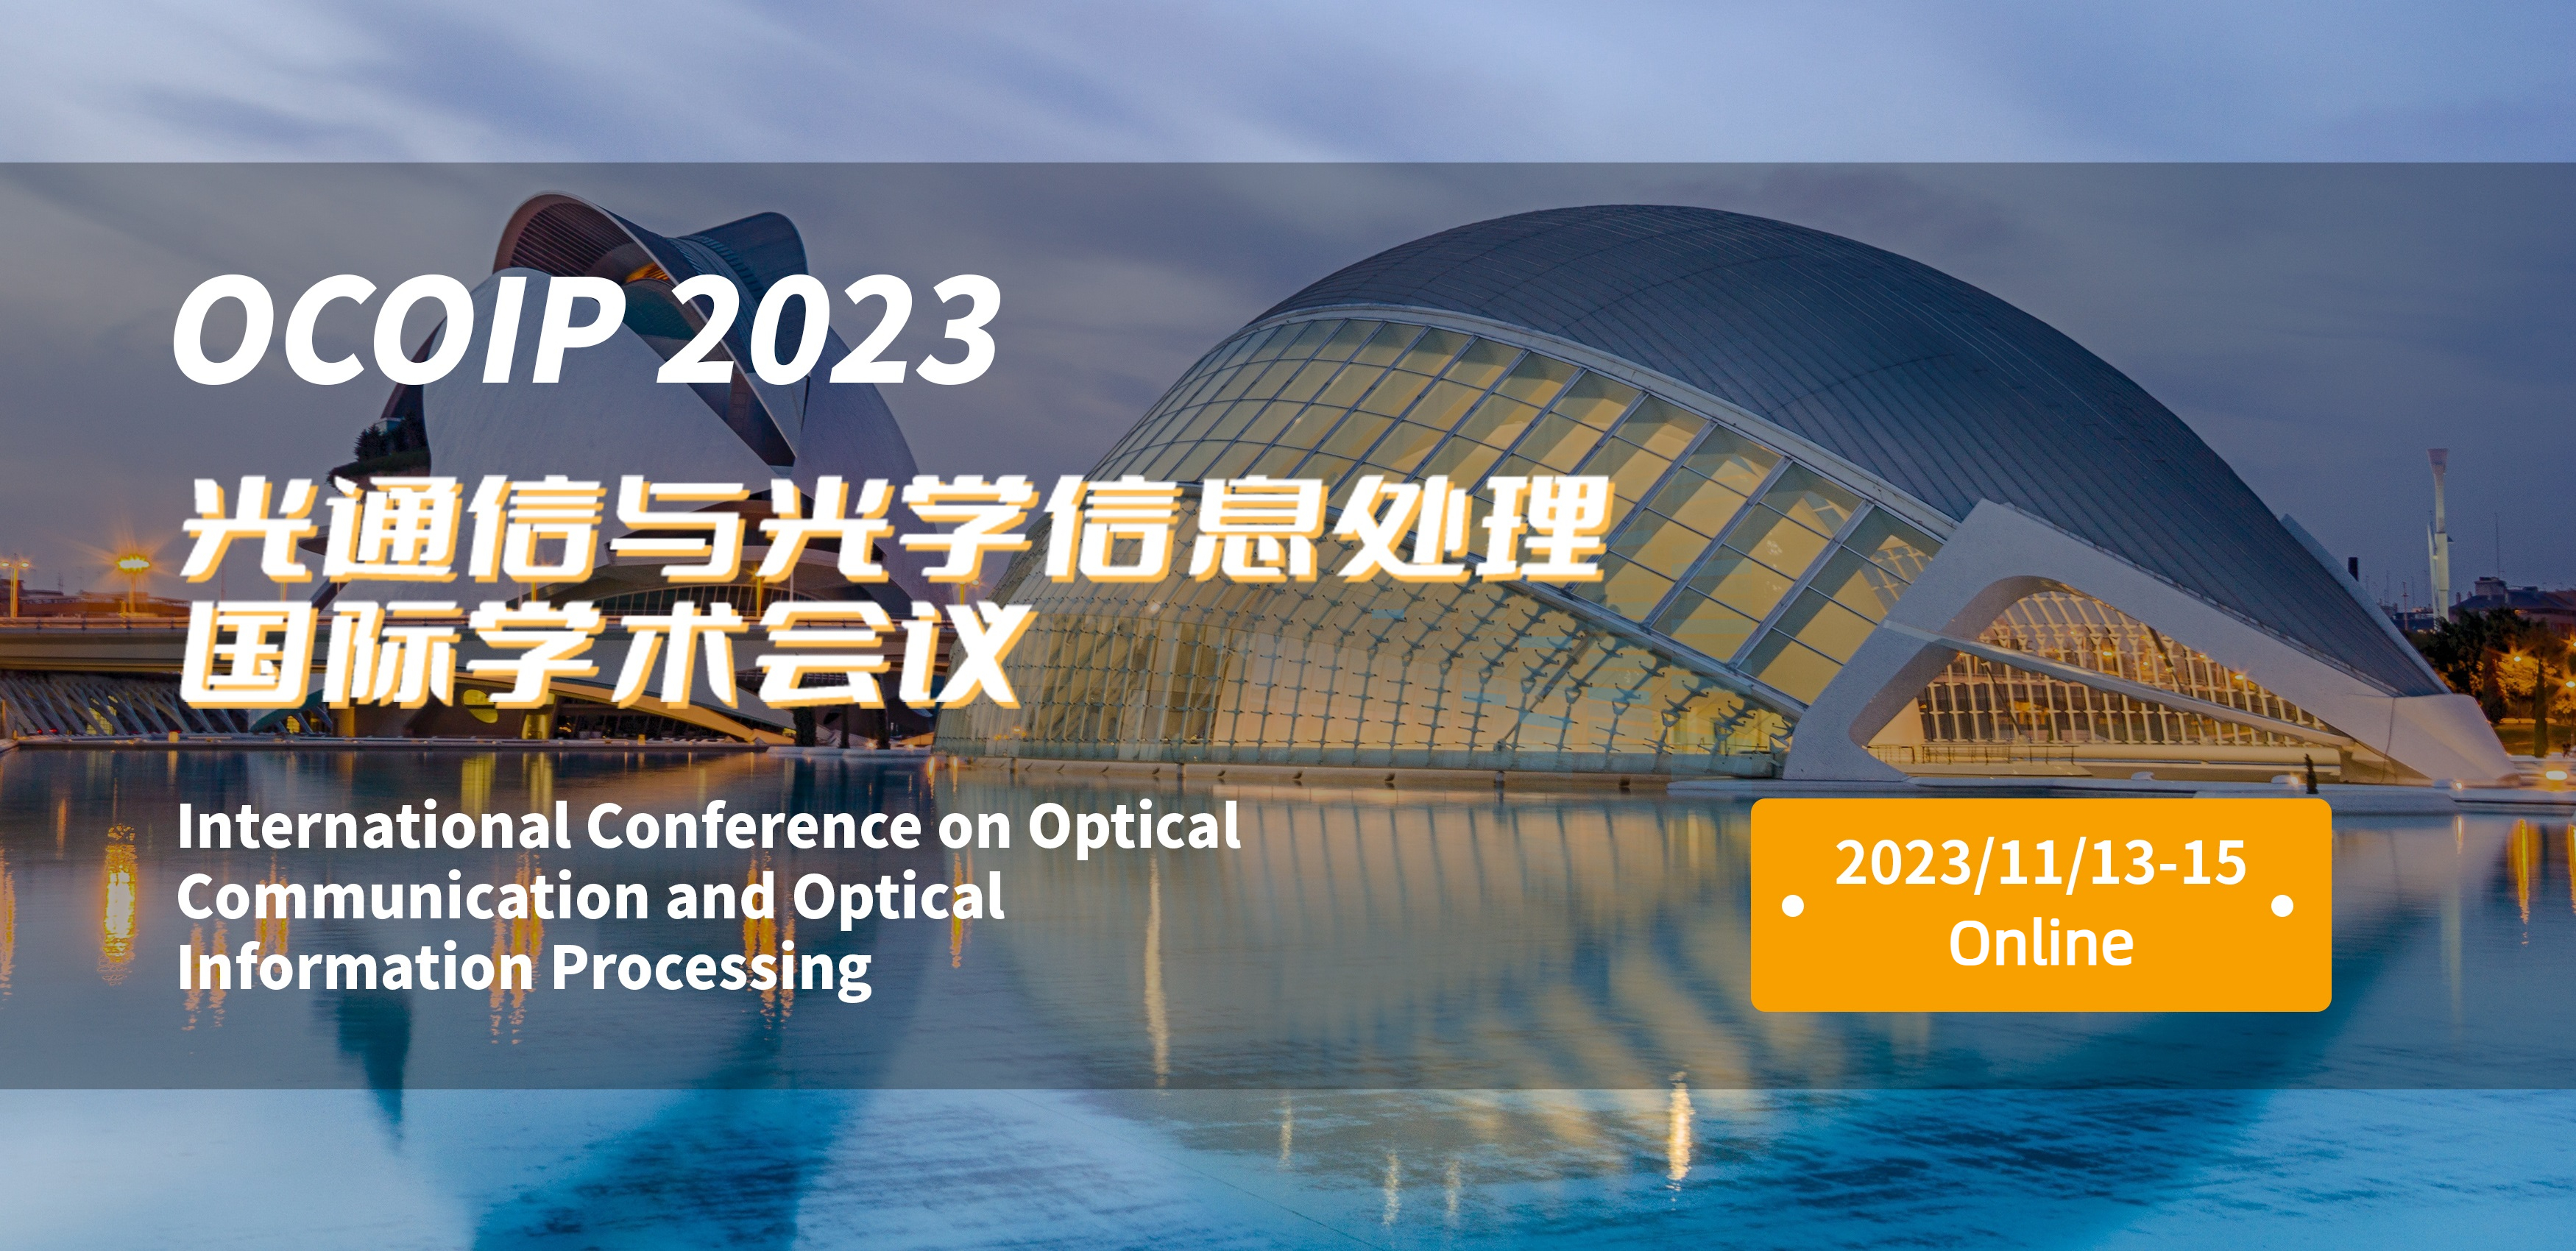 OCOIP - International Conference on Optical Communication and Optical Information Processing